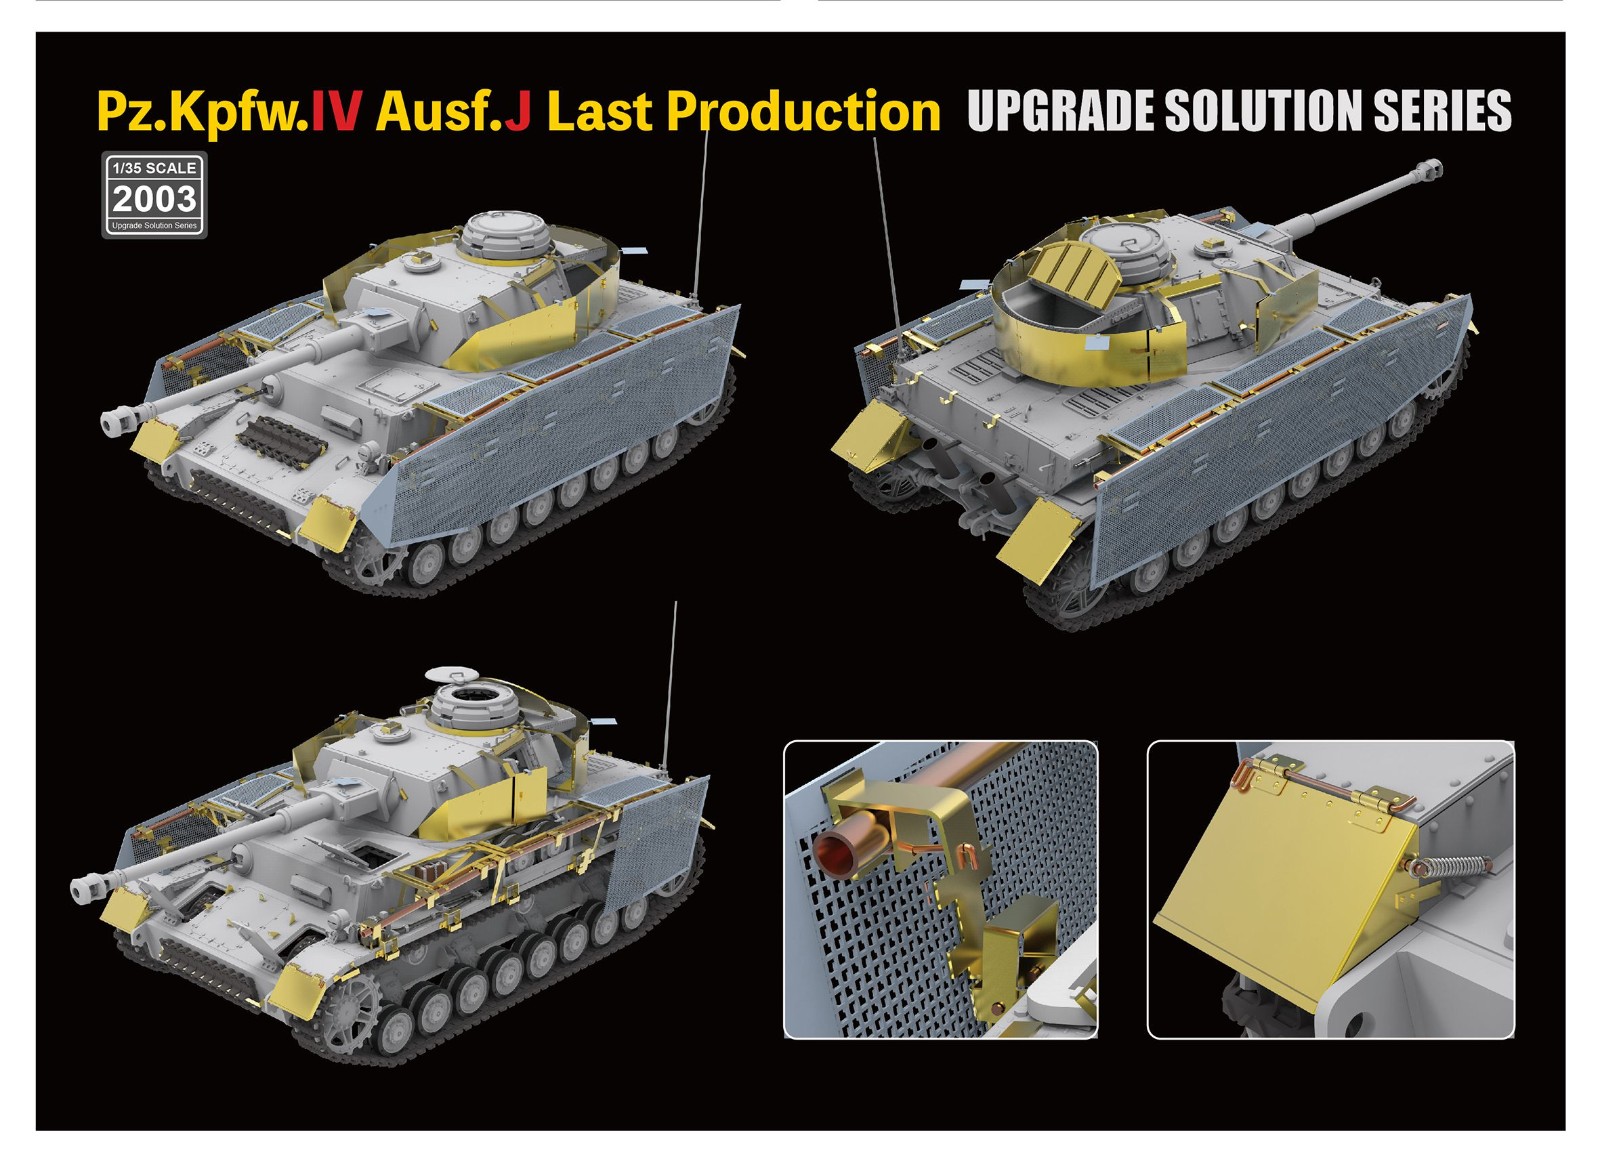 Ryefield-Model 1/35 2003 Upgrade Solution for Pz.Kpfw.IV Ausf.J